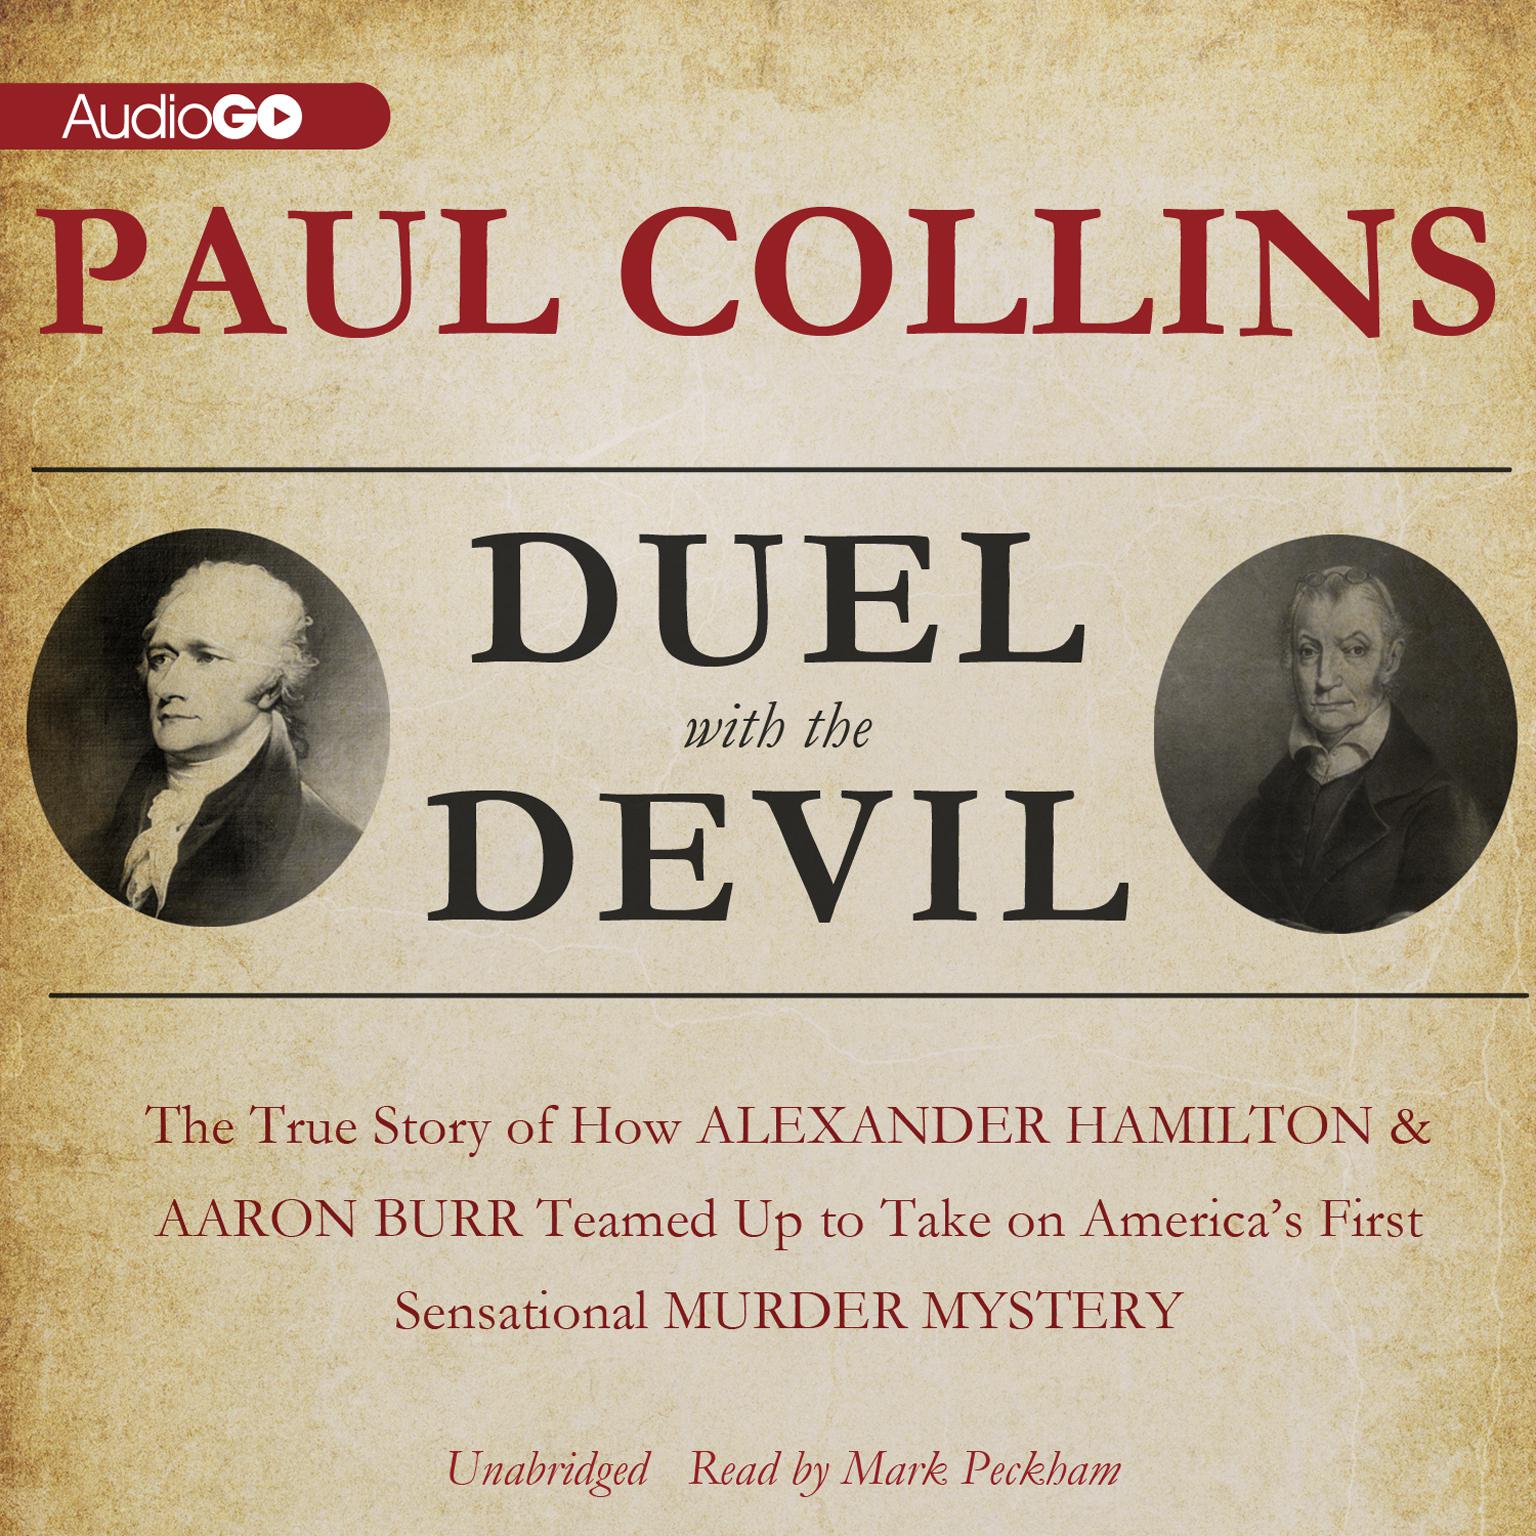 Duel with the Devil: The True Story of How Alexander Hamilton and Aaron Burr Teamed Up to Take on America’s First Sensational Murder Mystery Audiobook, by Paul Collins